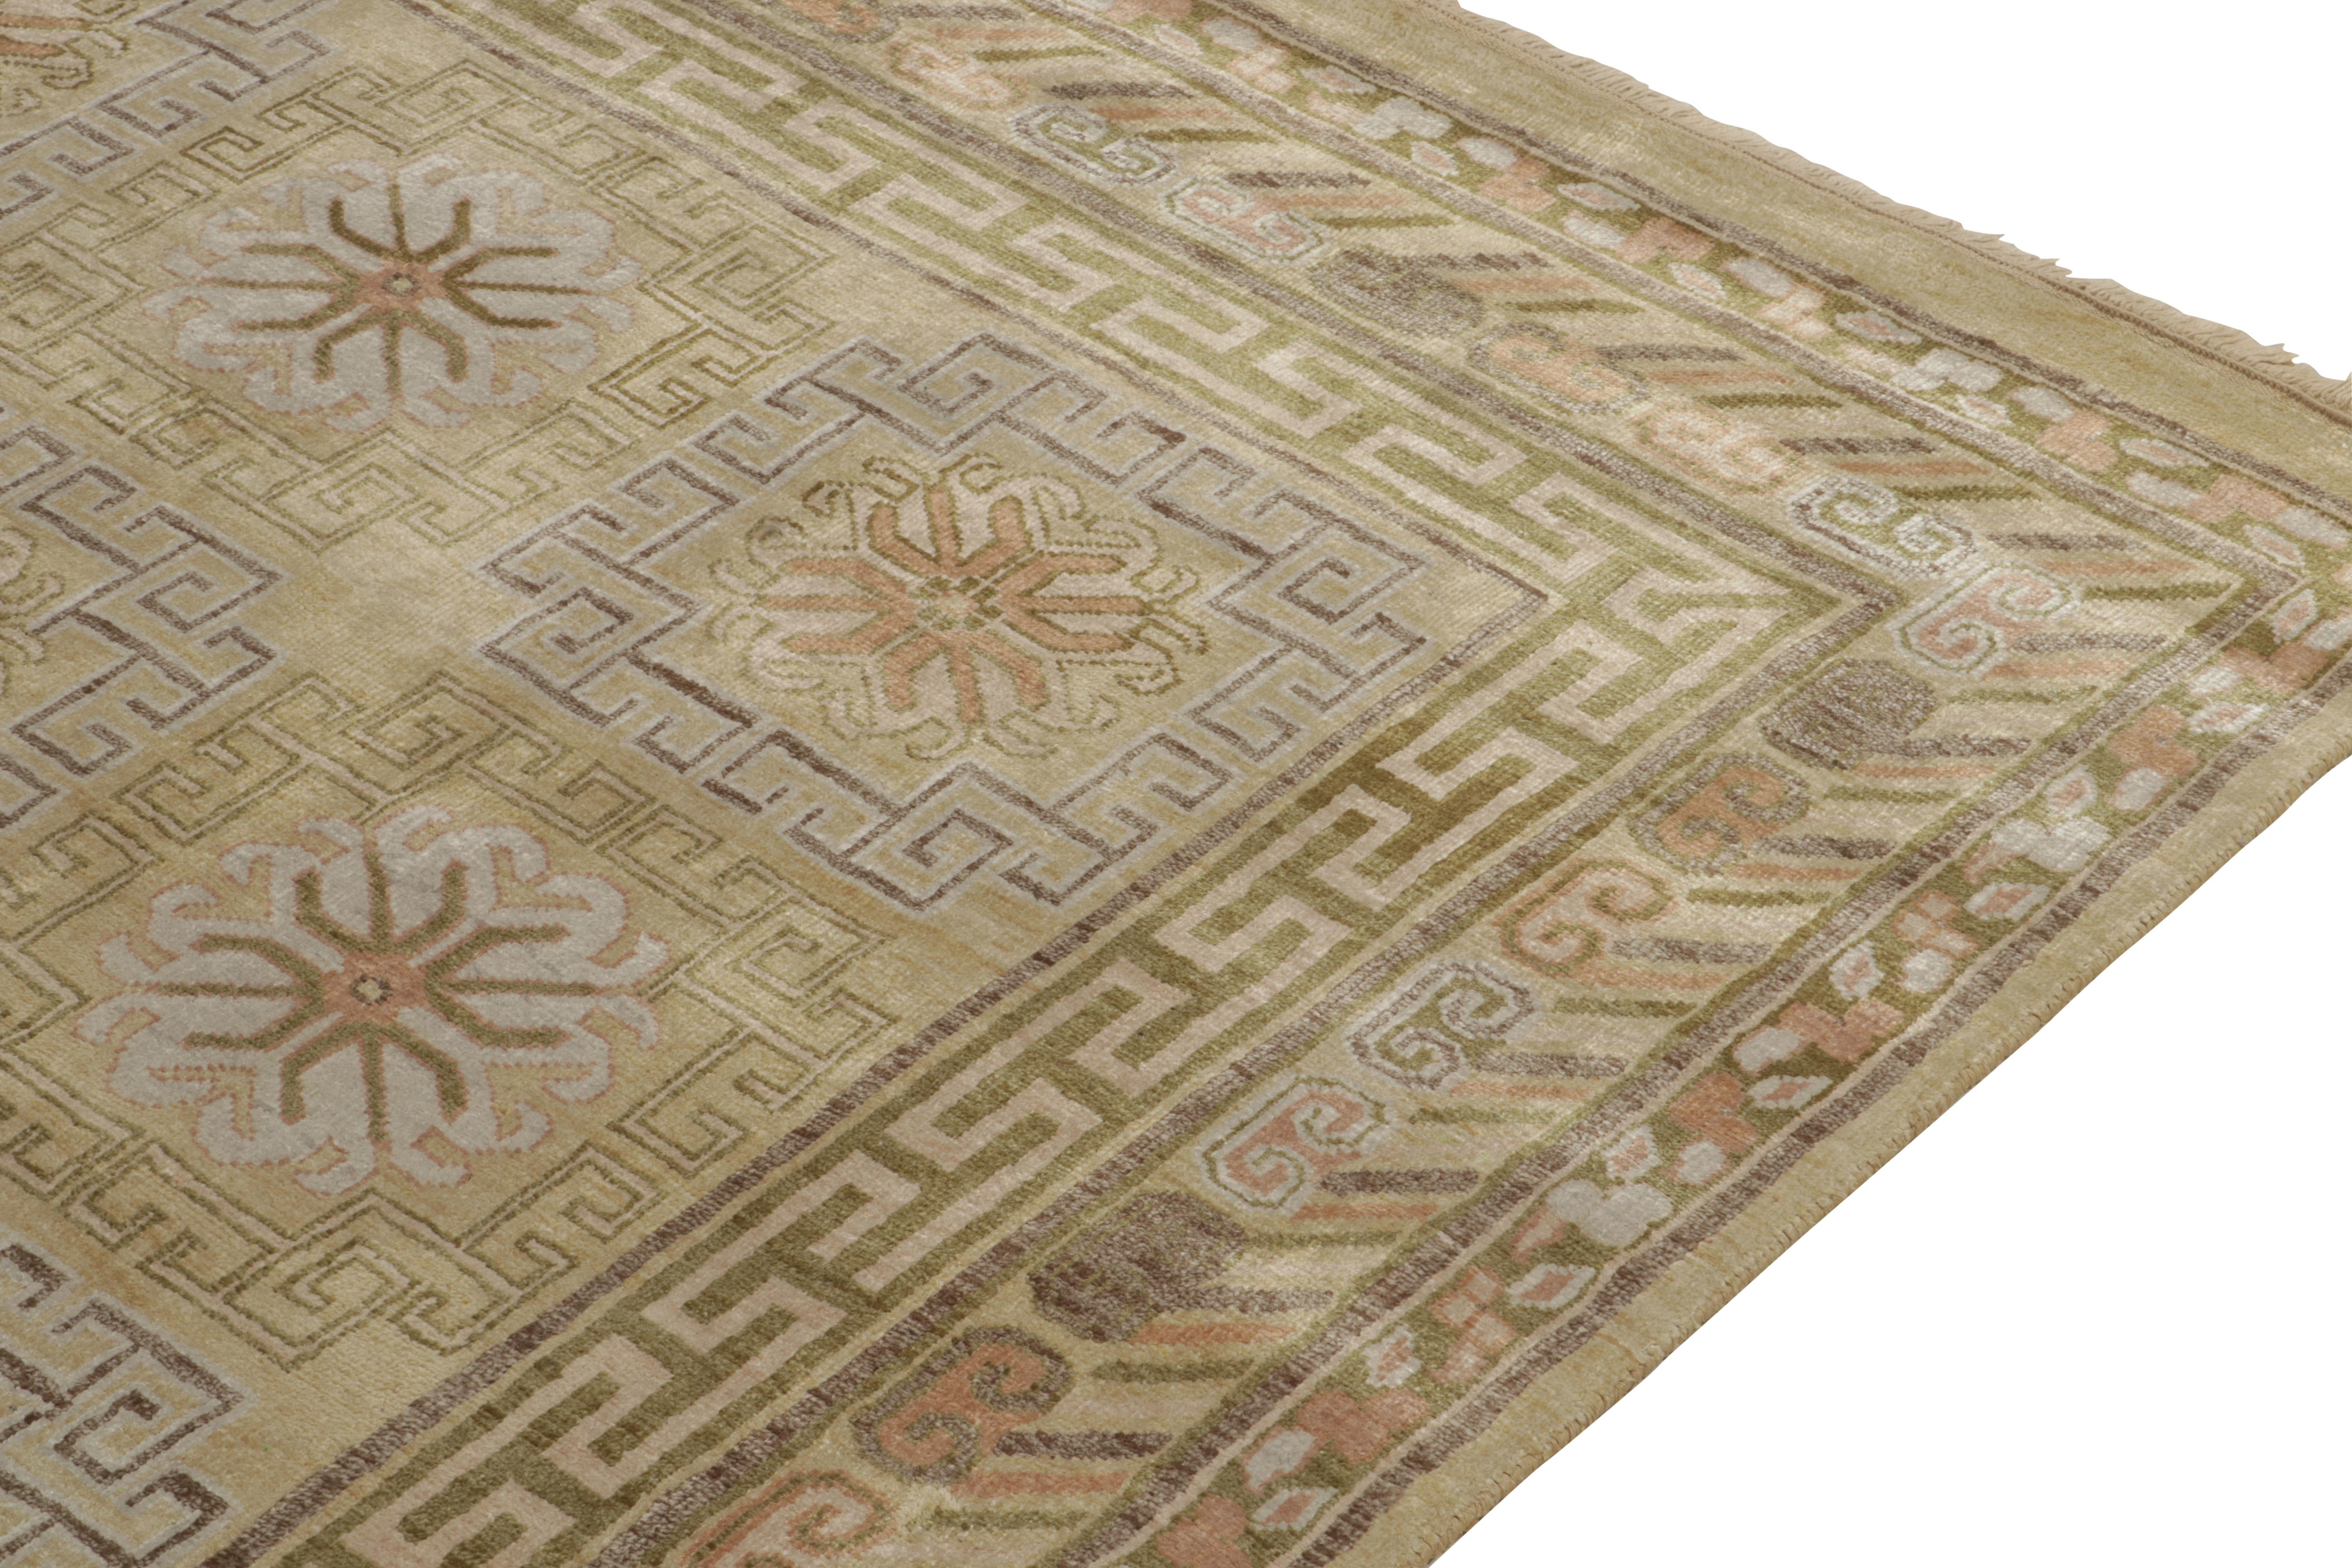 Rug & Kilim’s Antique Khotan style rug in Gold & Beige-Brown Geometric Patterns In New Condition For Sale In Long Island City, NY